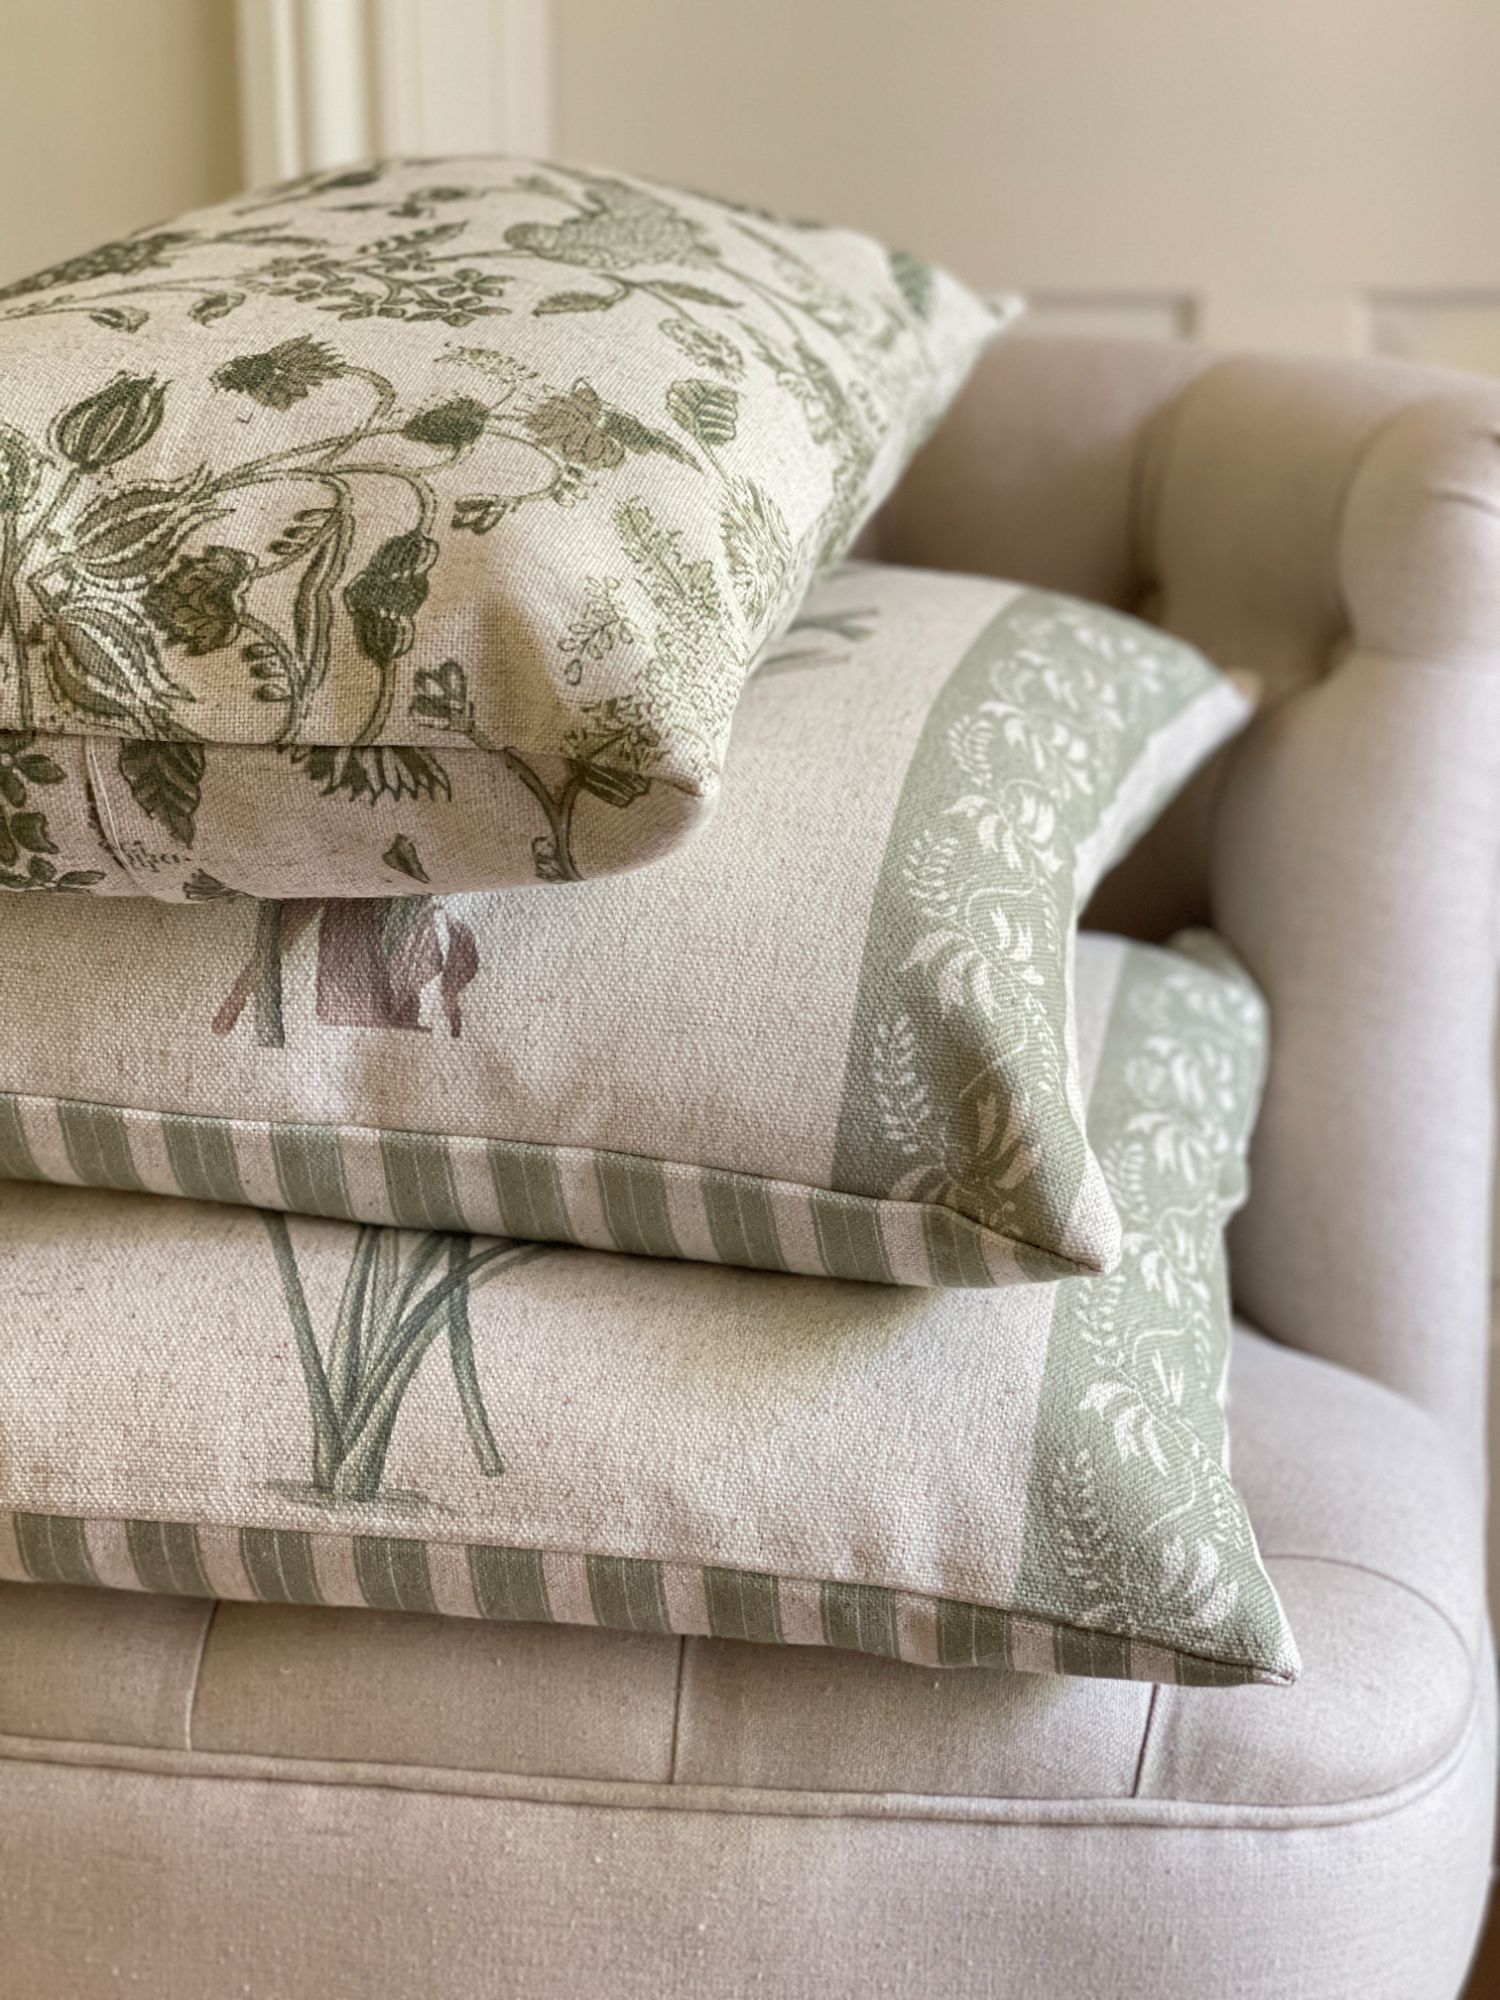 Linen cushions in Vintage Green and White